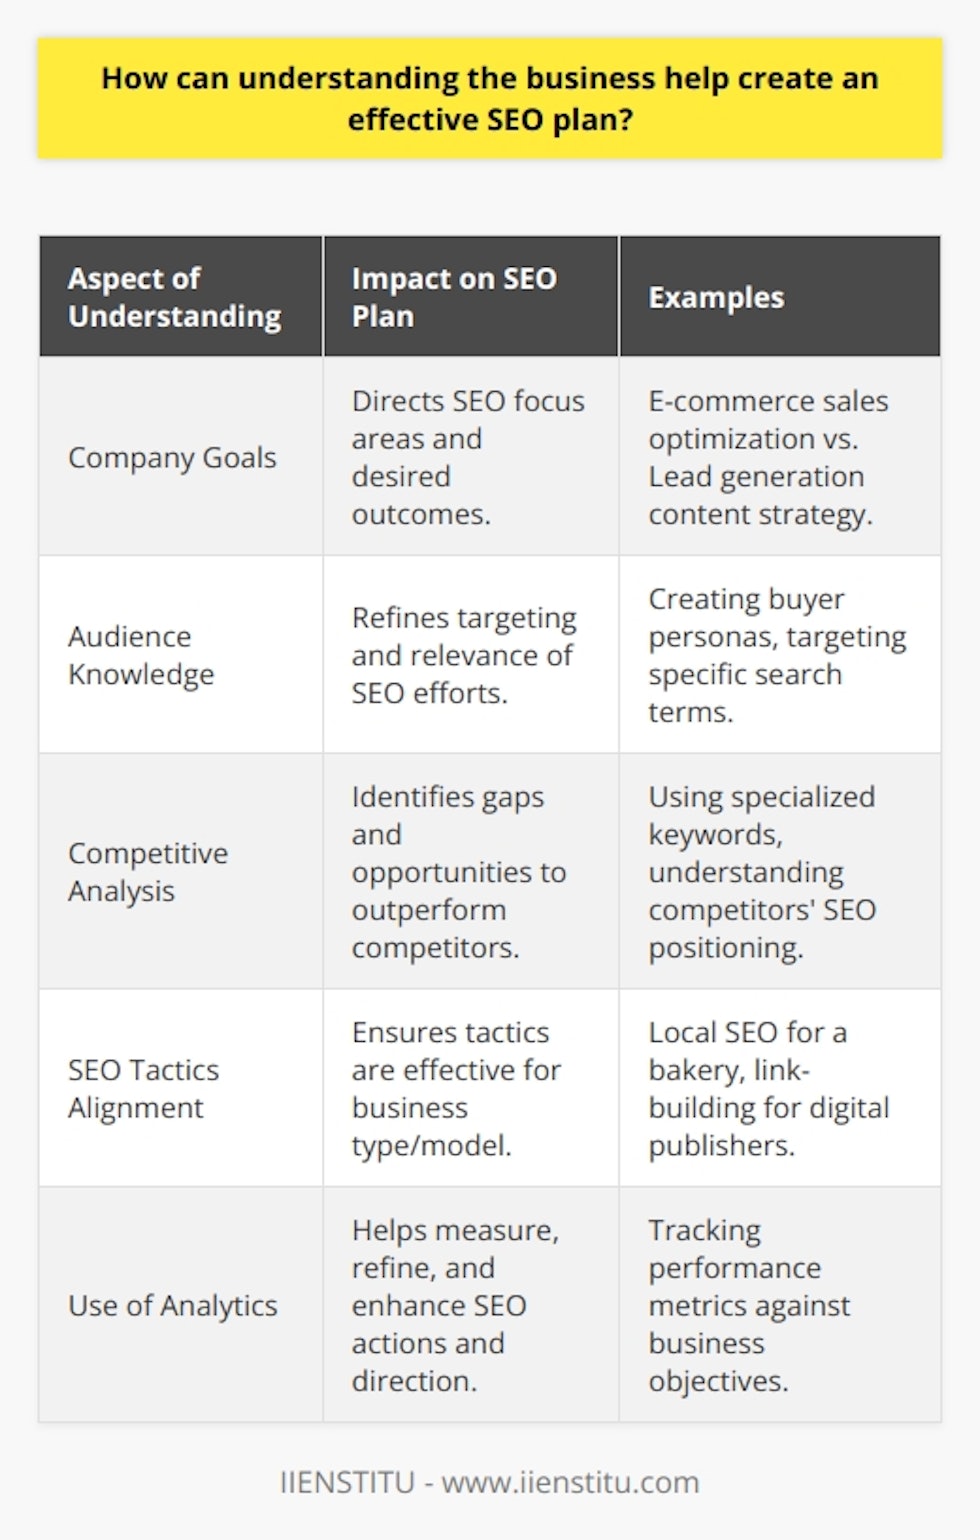 Creating an effective SEO plan demands a nuanced understanding of a business's core objectives and the unique characteristics of its market. A deep dive into the business, from its mission to its customer behaviors, informs an SEO strategy that is aligned with overarching company goals, rather than being a generic approach. Understanding the company's goals is the compass that guides the SEO journey. For instance, if the firm is steering towards e-commerce sales, the focus of the SEO plan might zoom in on optimizing product pages for higher conversion rates. Conversely, a B2B service provider seeking lead generation might benefit from a content-driven strategy, positioning the company as a thought leader to attract potential clients.The audience is another cornerstone of any robust SEO plan. Unpacking who the typical customers are, their online behavior patterns, the search terms they use, and the kind of content they consume illuminates the path to organically connecting with them. By constructing buyer personas, SEO efforts can be finely tuned to address the demands and queries of the most valuable users.Furthermore, a thorough understanding of the business landscape can uncover the sneaky pitfalls and golden opportunities within its niche. Competitive analysis enables a business to capitalize on the gaps left by its competitors or to pioneer trends before they become saturated. Knowing where your competition stands in terms of SEO can give your business a strategic edge.In action, this could include making use of specialized keywords that competitors have overlooked. This is a method that not only catches the attention of the more defined audiences but also capitalizes on less competitive search terms, potentially accelerating a site’s rankings in search engine result pages (SERPs).Regarding SEO tactics, aligning them with business needs is paramount. A local bakery, for instance, will gain more by honing in on local SEO methods, like managing its Google My Business listing and local citations. Meanwhile, a digital publisher may prioritize content marketing and link-building strategies to boost domain authority.Finally, analytics play a significant role in shaping an effective, ongoing SEO strategy. A business must not only set up broad objectives but also track performance metrics against these goals. This enables constant iteration and refinement of the plan, ensuring that each step not only moves in the right direction but is also driven by the firm's unique digital footprint and market position.In sum, marrying a comprehensive understanding of the business with SEO planning is not just a decision made to enhance online visibility; it's a strategic move to ensure that every SEO action taken is a well-aimed step towards the company's ultimate success. By grasping the fabric of the business, its goals, audience, and competitive landscape, a customized, agile, and progressive SEO plan can be sculpted—one that not only climbs rankings but also underpins the business's growth and evolution in the digital ecosystem.